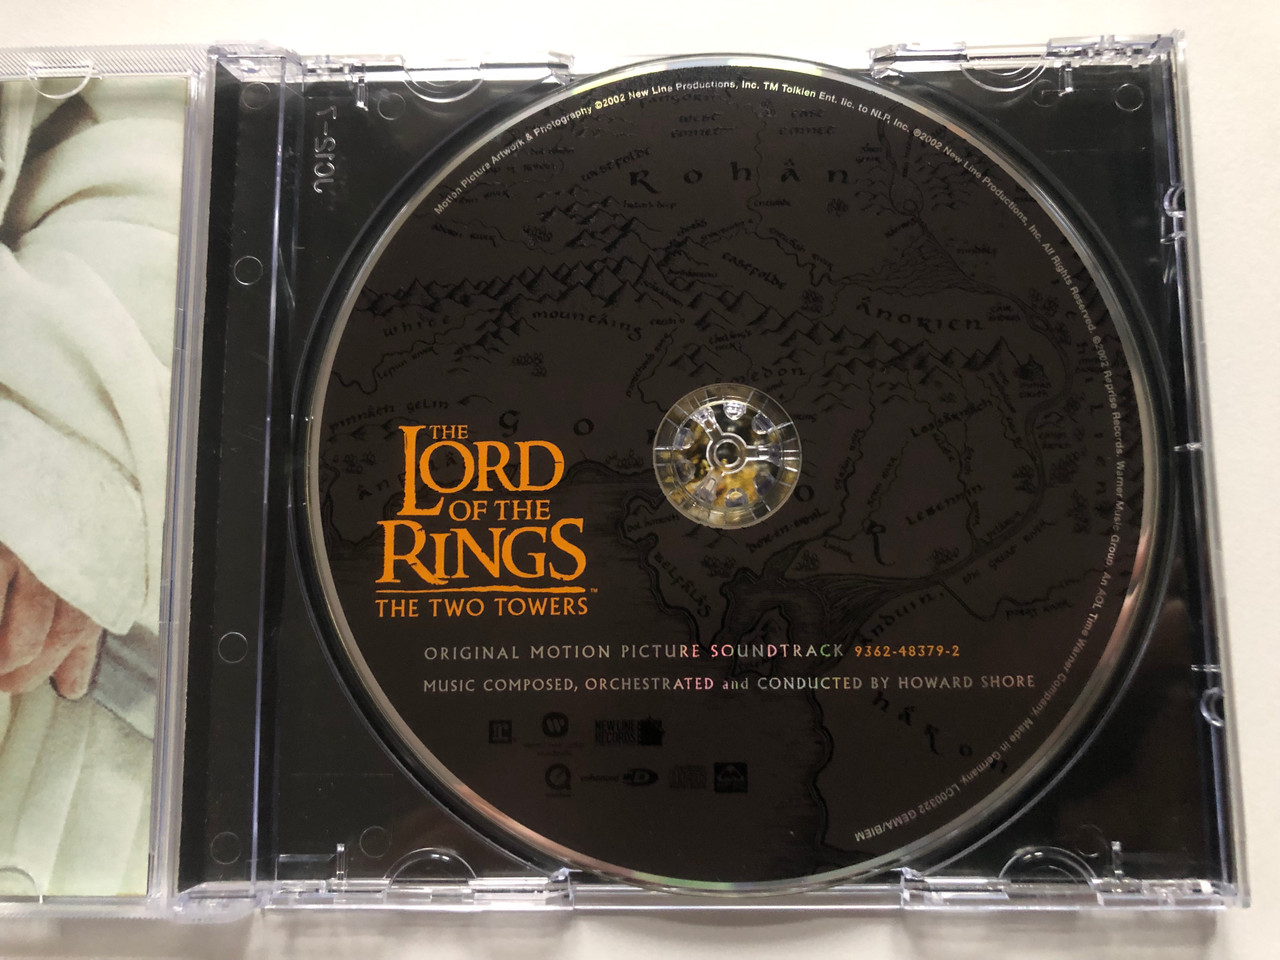 https://cdn10.bigcommerce.com/s-62bdpkt7pb/products/0/images/216375/The_Lord_Of_The_Rings_The_Two_Towers_Original_Motion_Picture_Soundtrack_Music_Composed_Orchestrated_and_Conducted_By_Howard_Shore_Reprise_Records_Audio_CD_2002_9362-48379-2_3__76380.1647271806.1280.1280.JPG?c=2&_gl=1*lh045y*_ga*MjA2NTIxMjE2MC4xNTkwNTEyNTMy*_ga_WS2VZYPC6G*MTY0NzI3MDg0Ny4zMTkuMS4xNjQ3MjcxNzIyLjYw